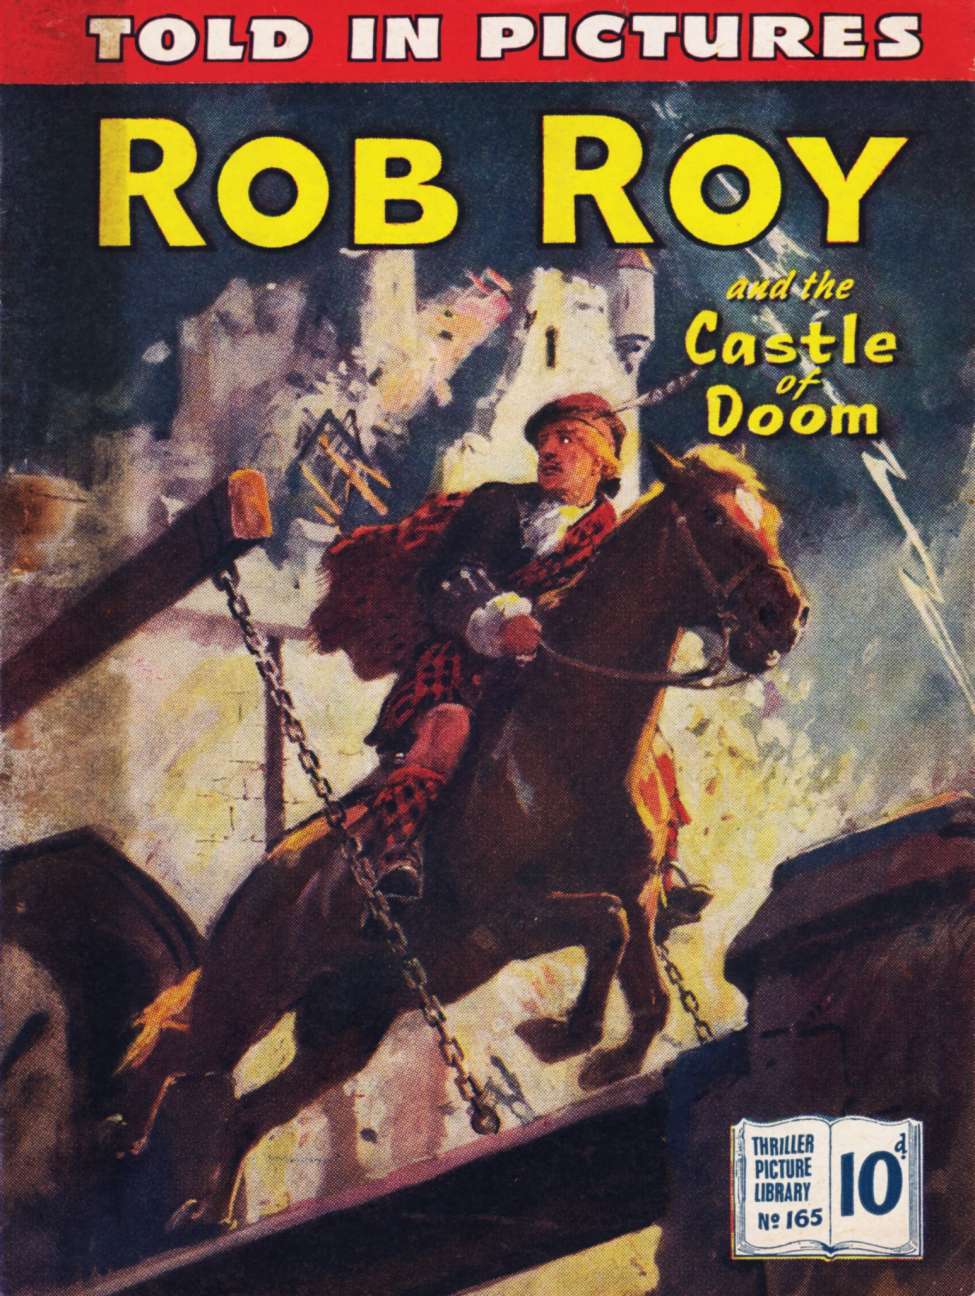 Book Cover For Thriller Picture Library 165 - Rob Roy and The Castle of Doom